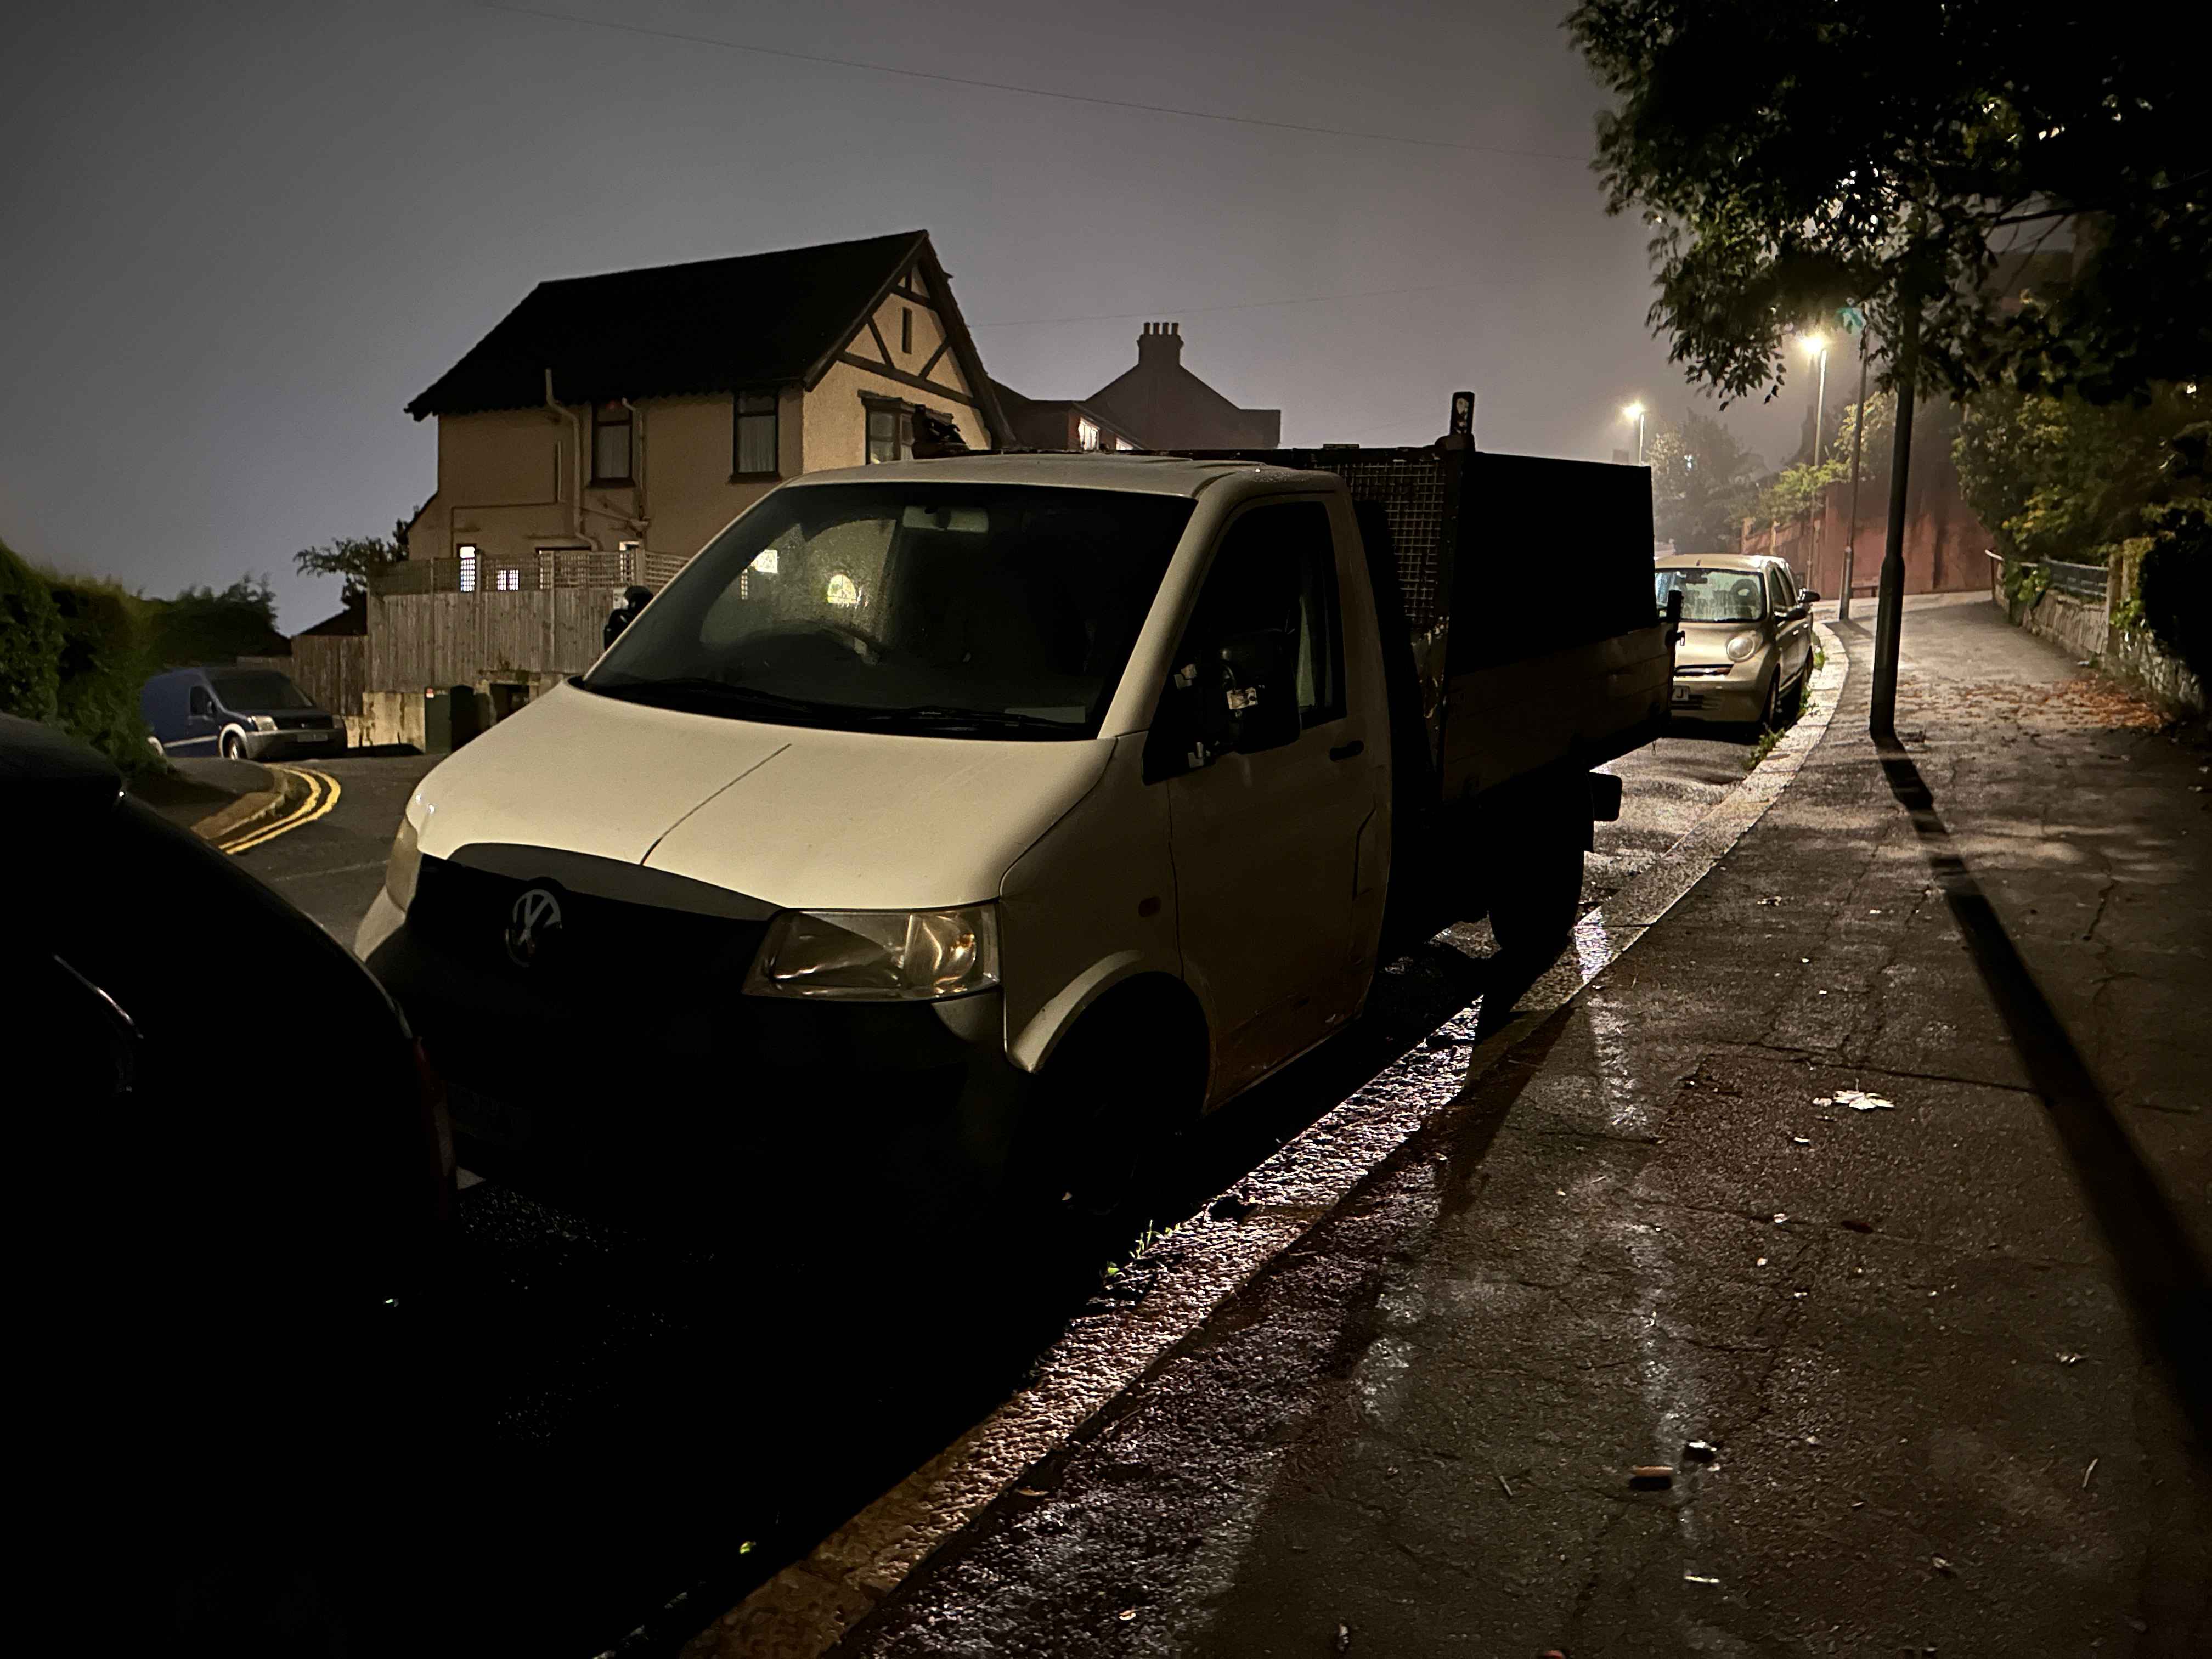 Photograph of BG54 JHU - a White Volkswagen T-Sporter parked in Hollingdean by a non-resident. The third of four photographs supplied by the residents of Hollingdean.